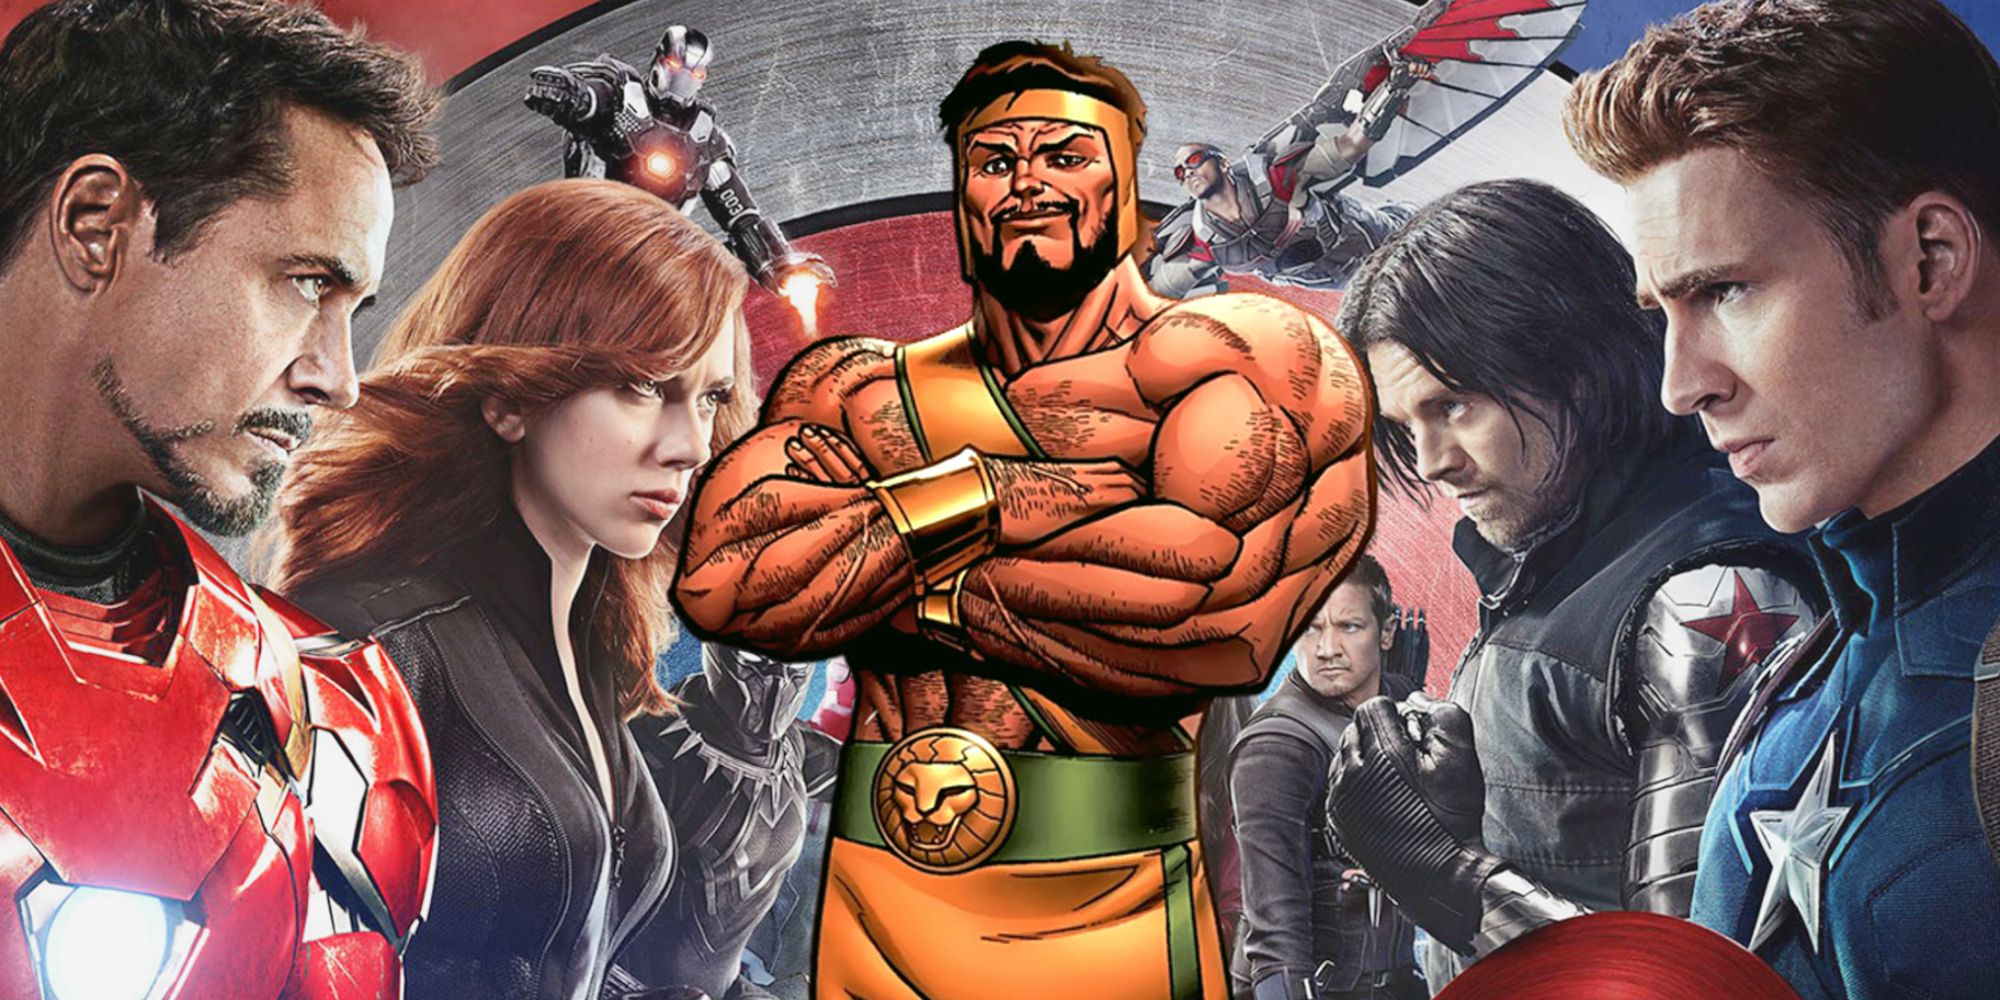 Marvels Hercules and the Avengers in the MCUs Civil War